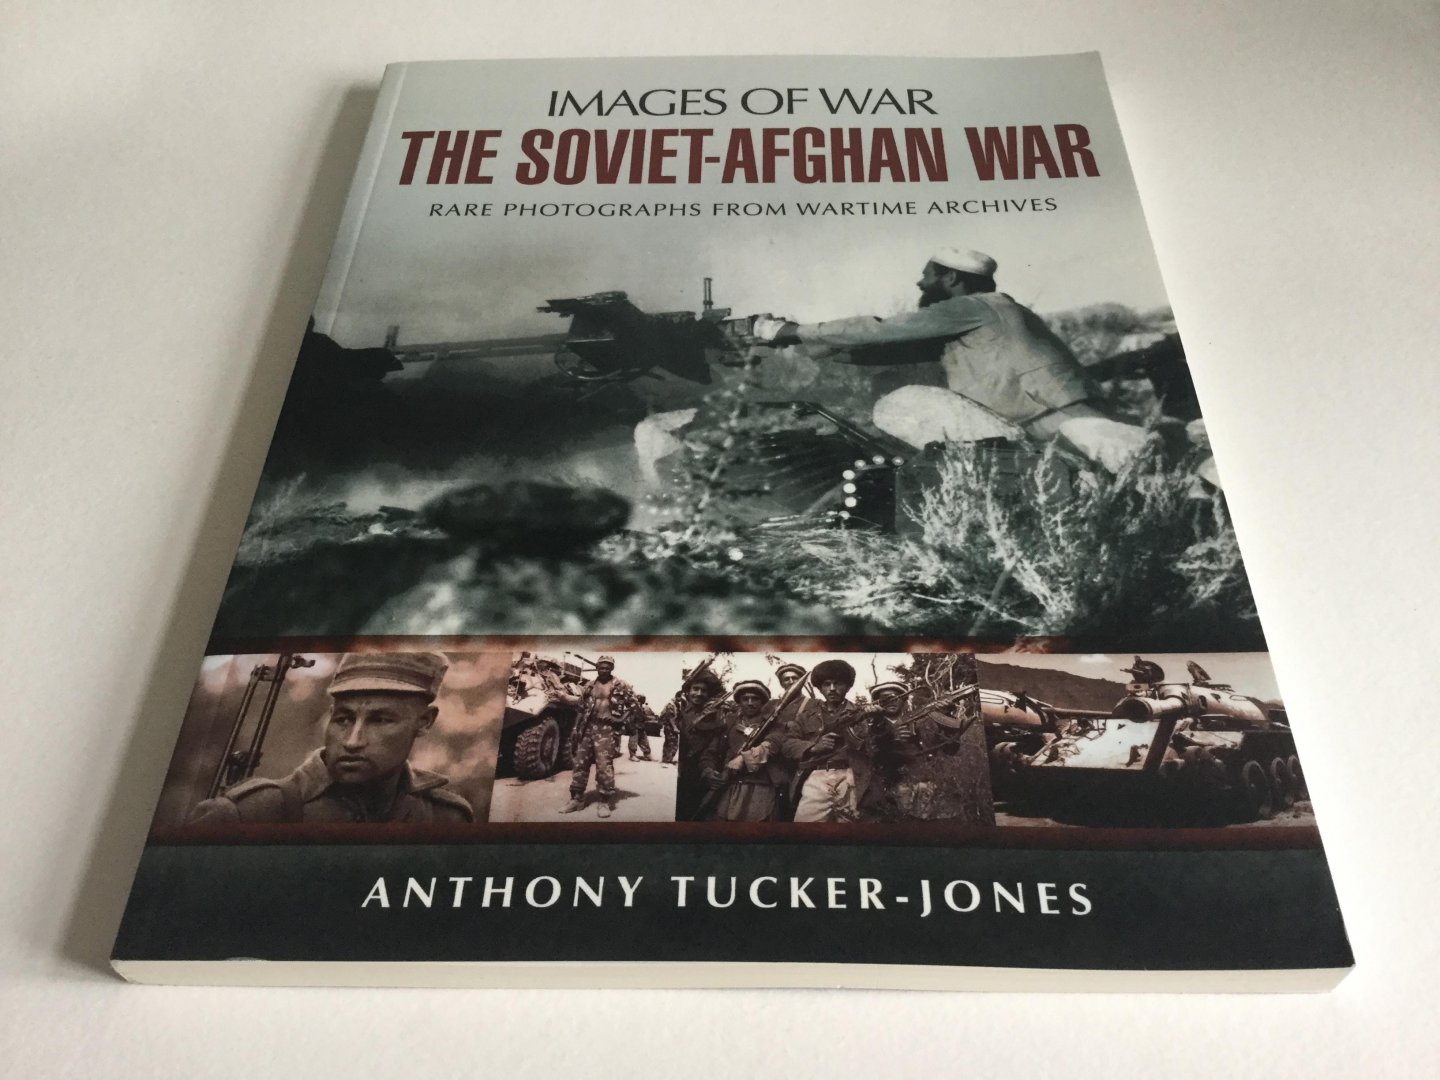 Tucker-jones, Anthony - The Soviet-Afghan War - Rare Photographs from Wartime Archives